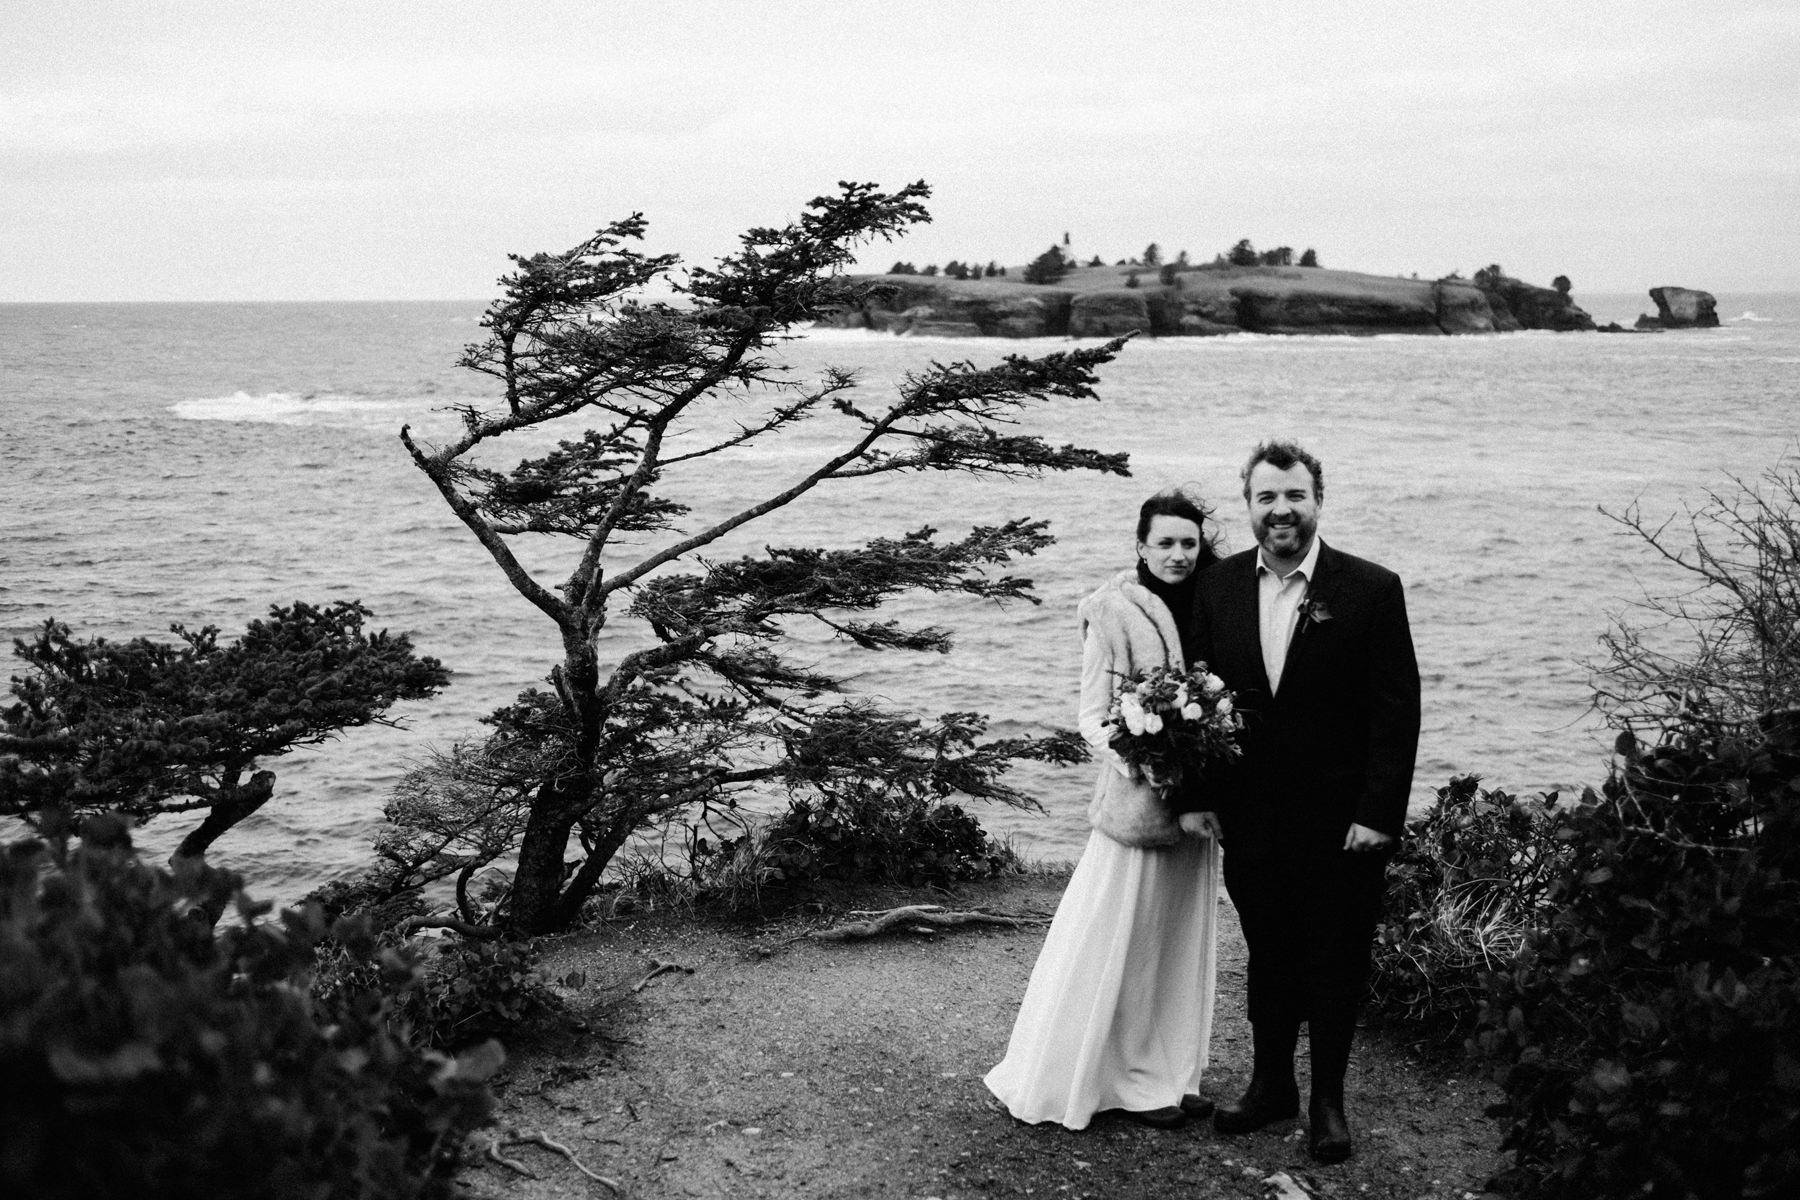 181-cloudy-pnw-elopement-on-film-at-cape-flattery-in-washington.jpg